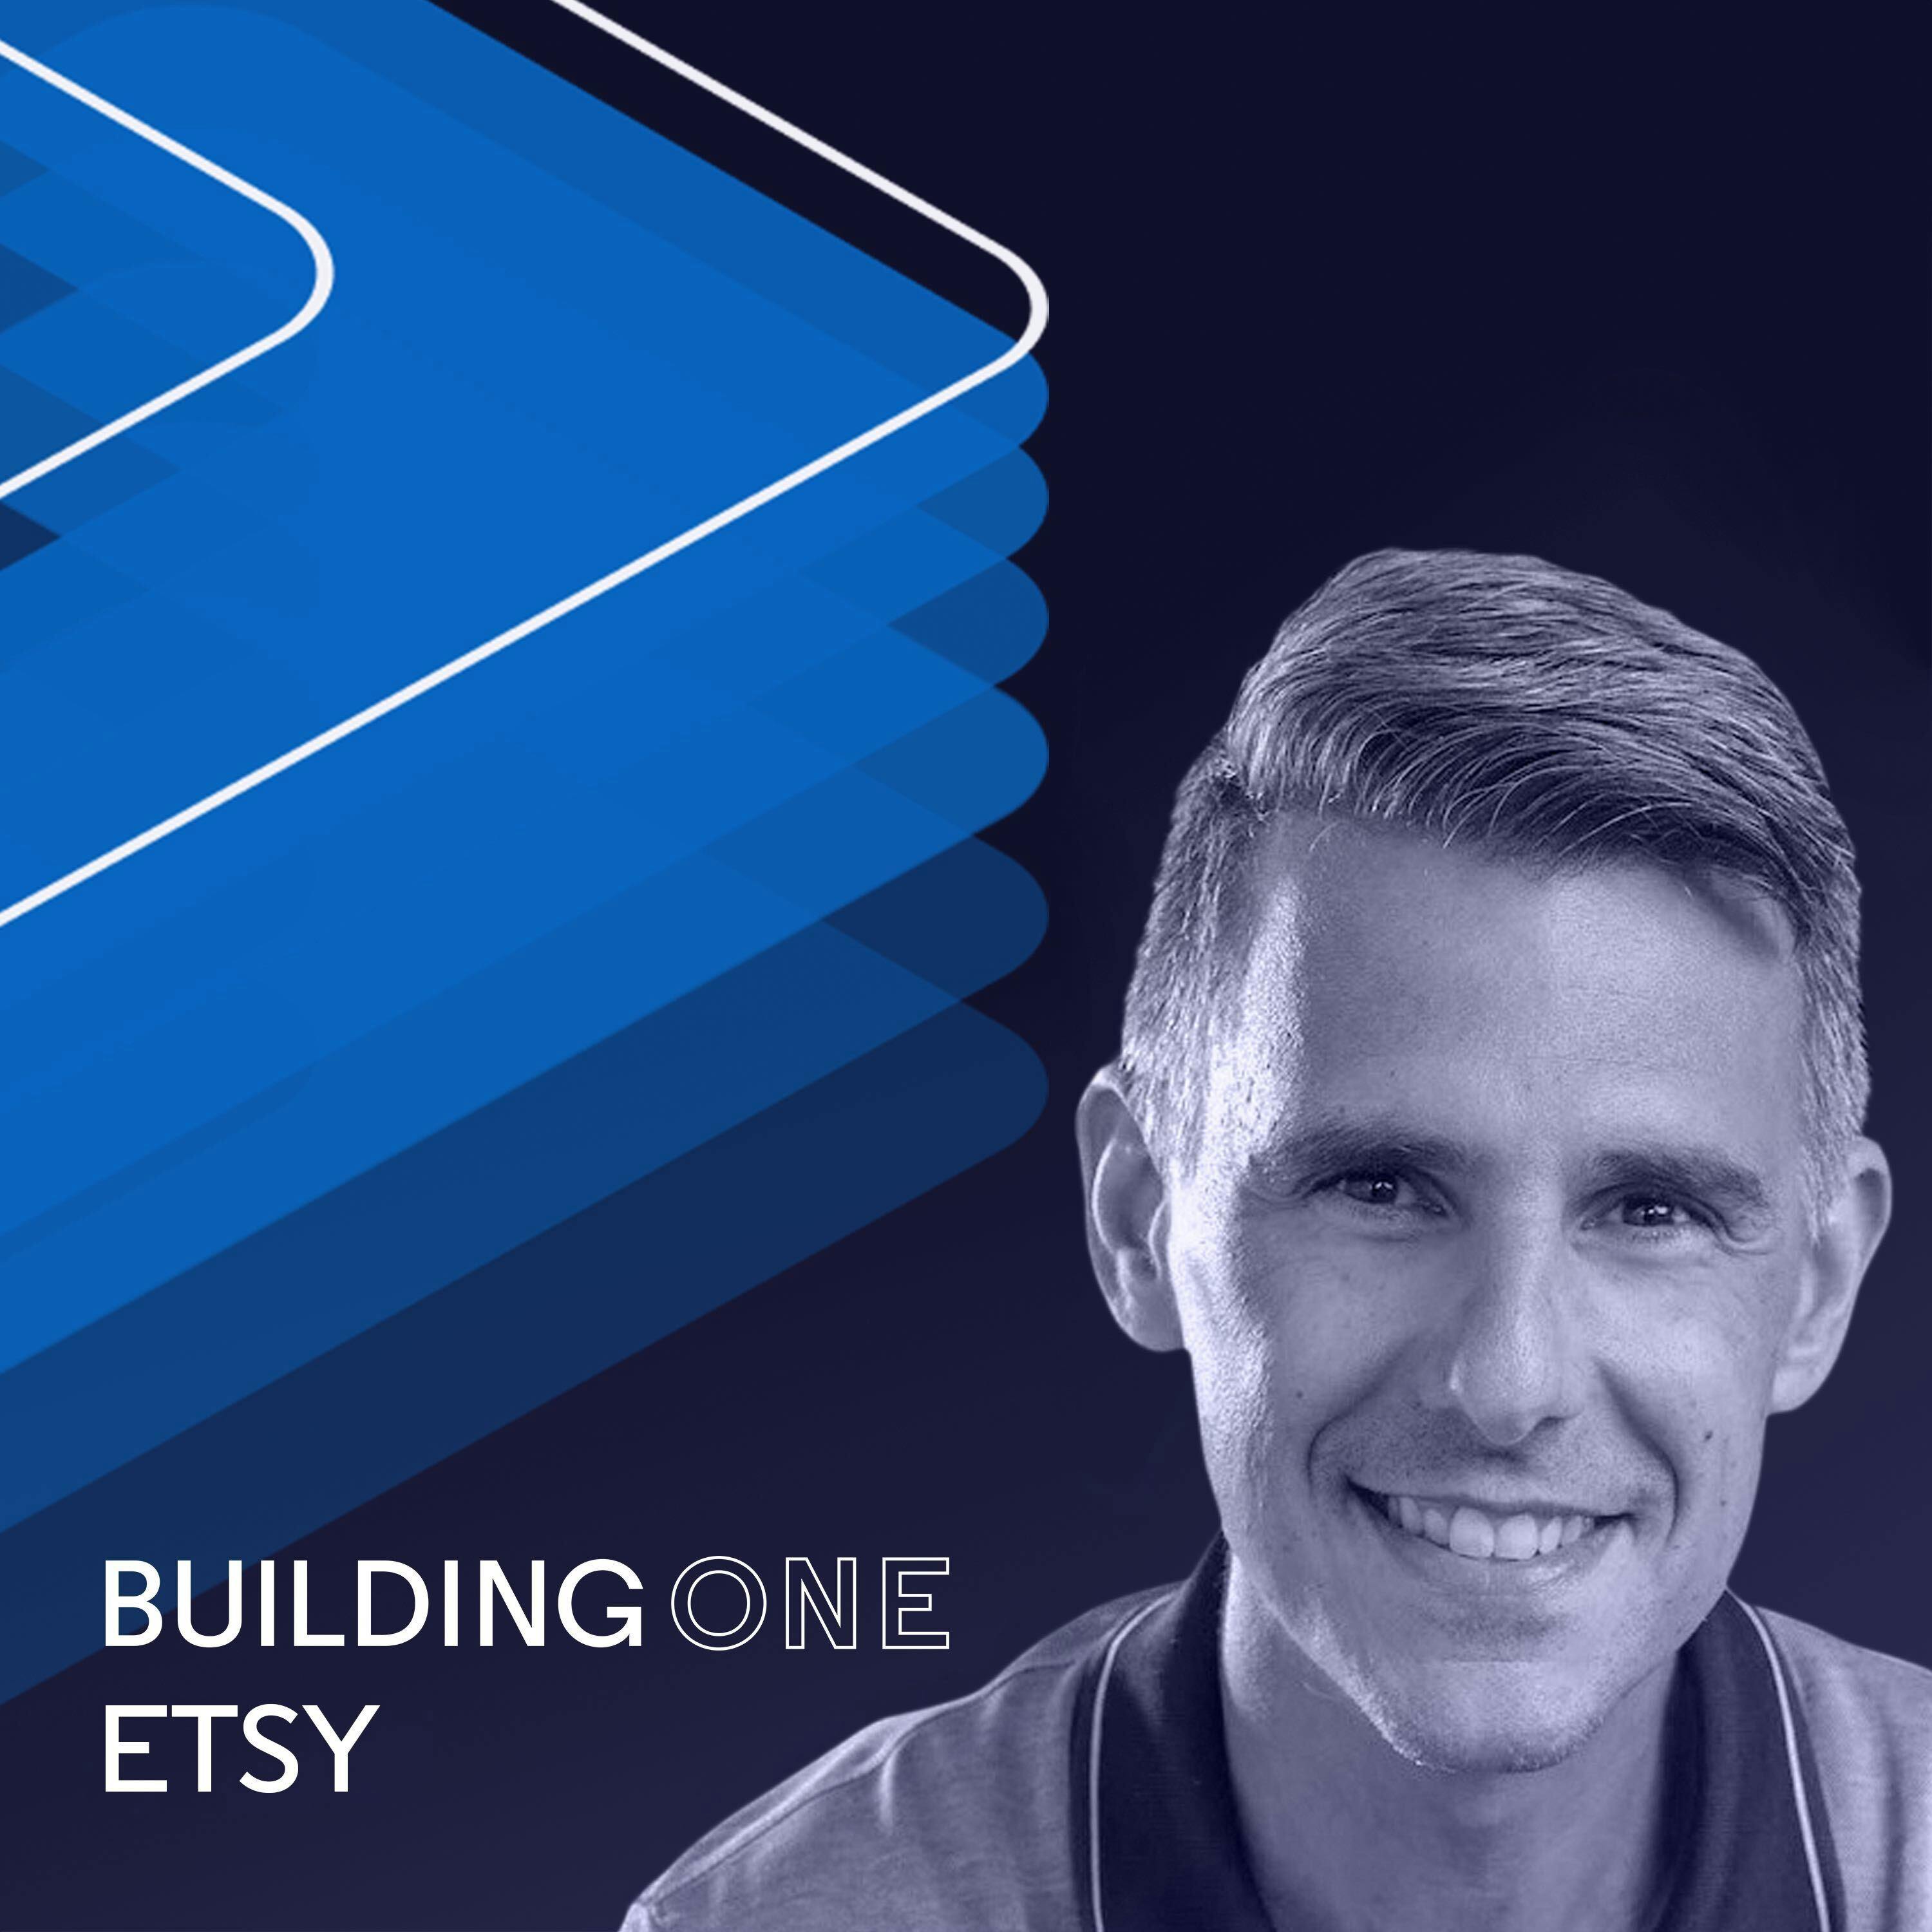 Building Etsy with Nick Daniel